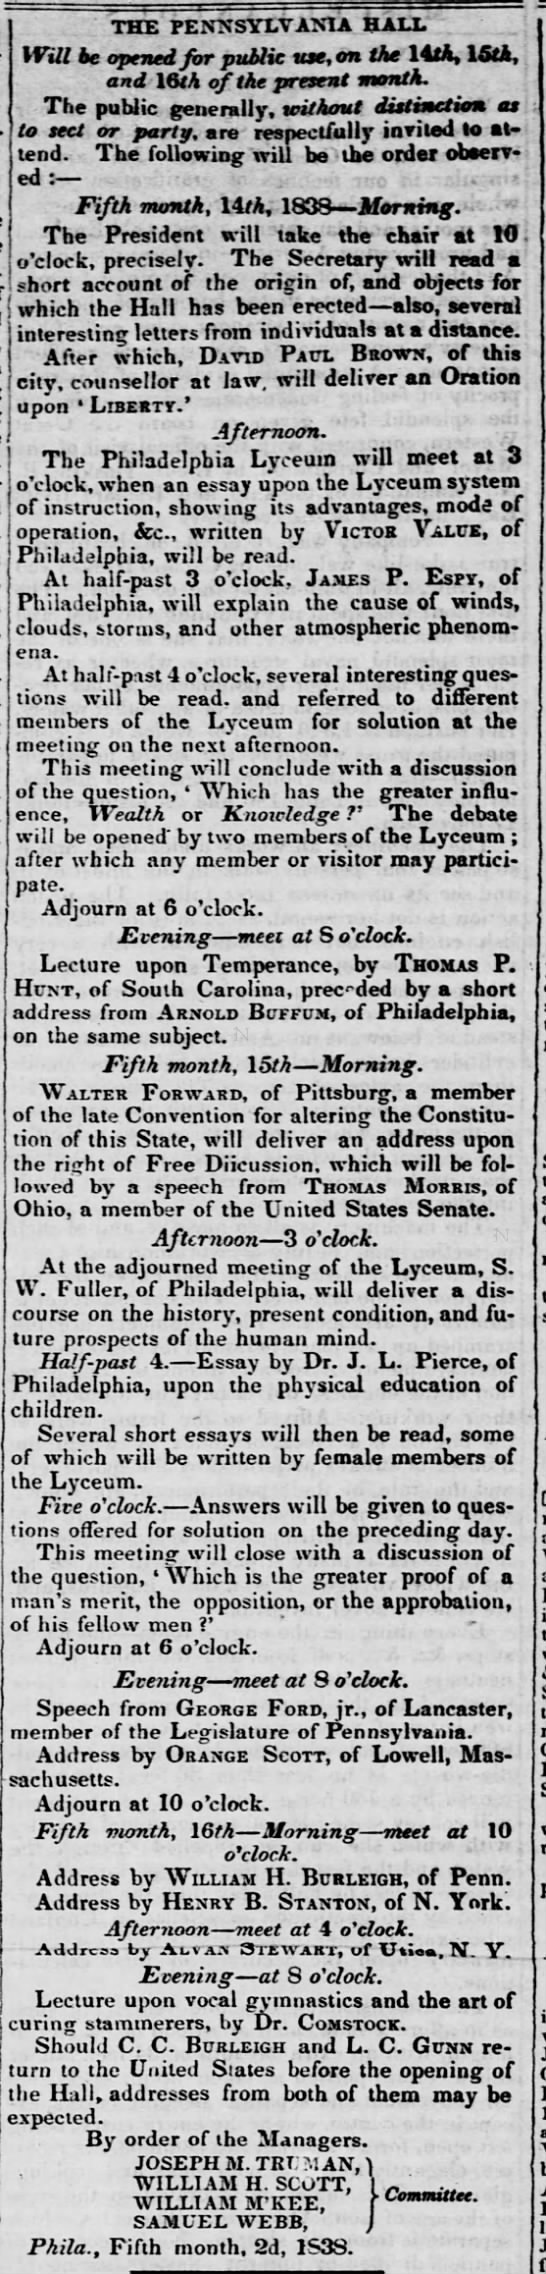 Activities at opening of Pennsylvania Hall - 